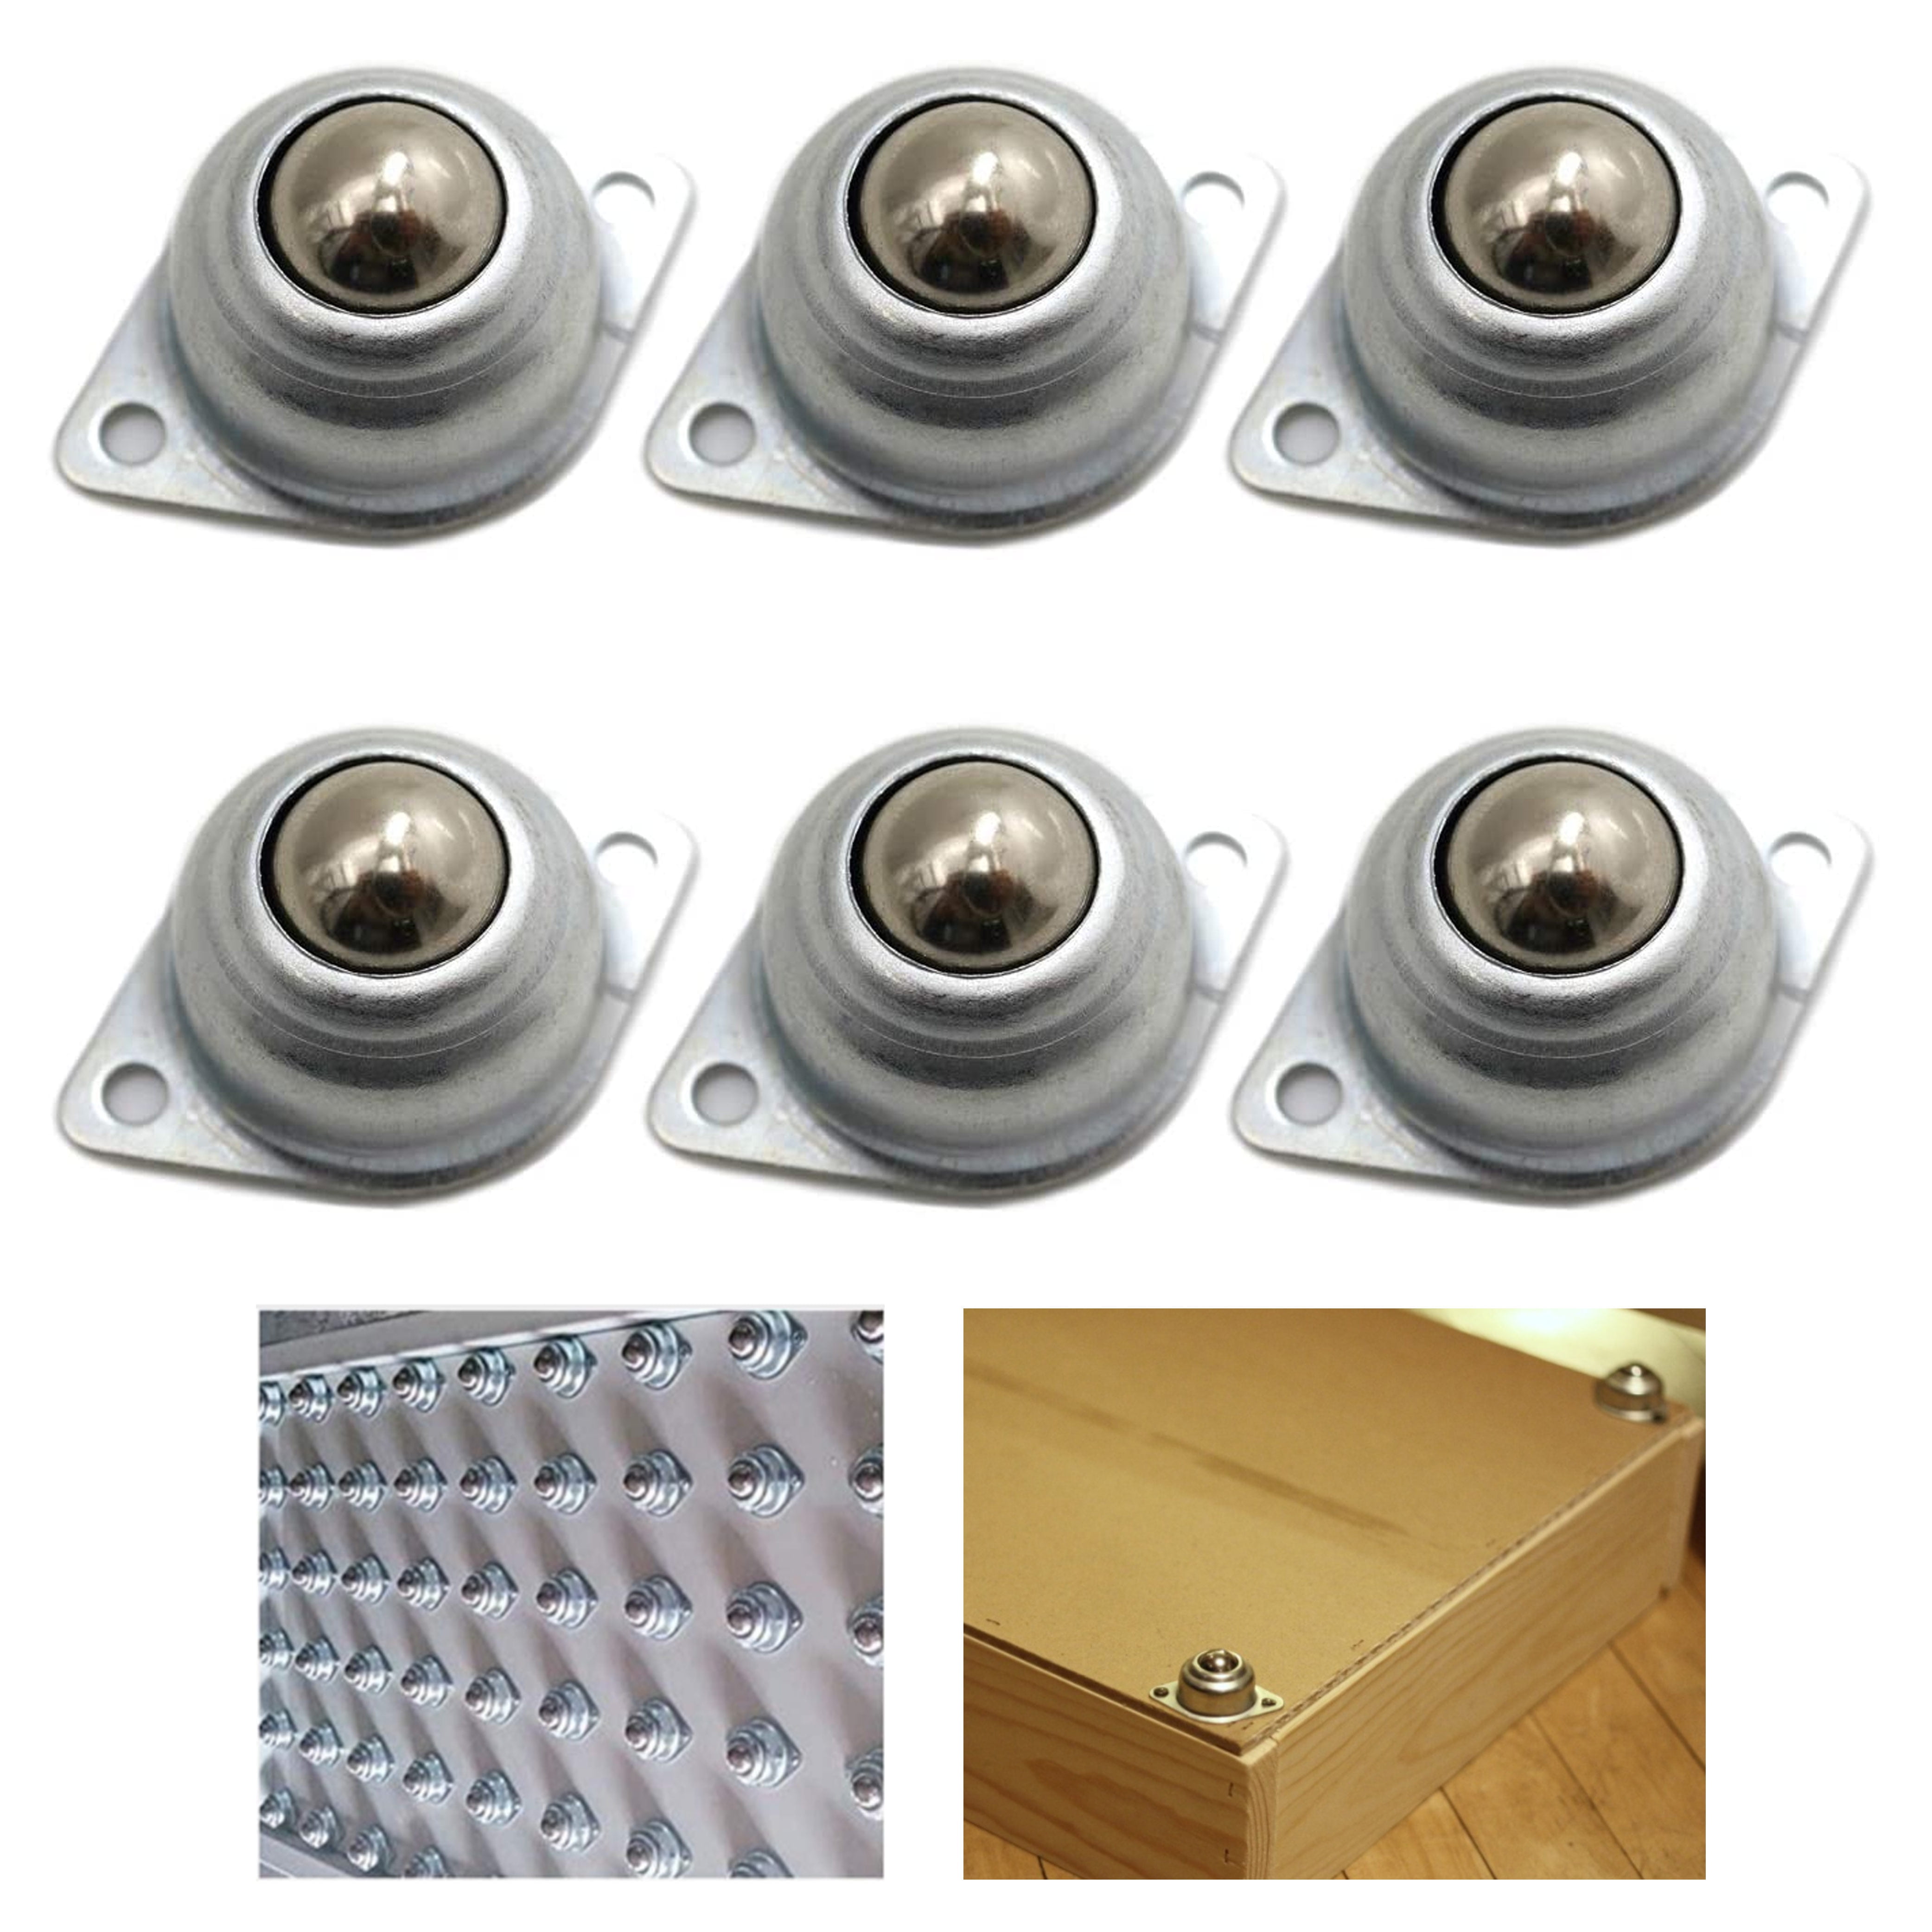 Ball Transfer Caster Wheels For Furniture Casters Transfer Rollers